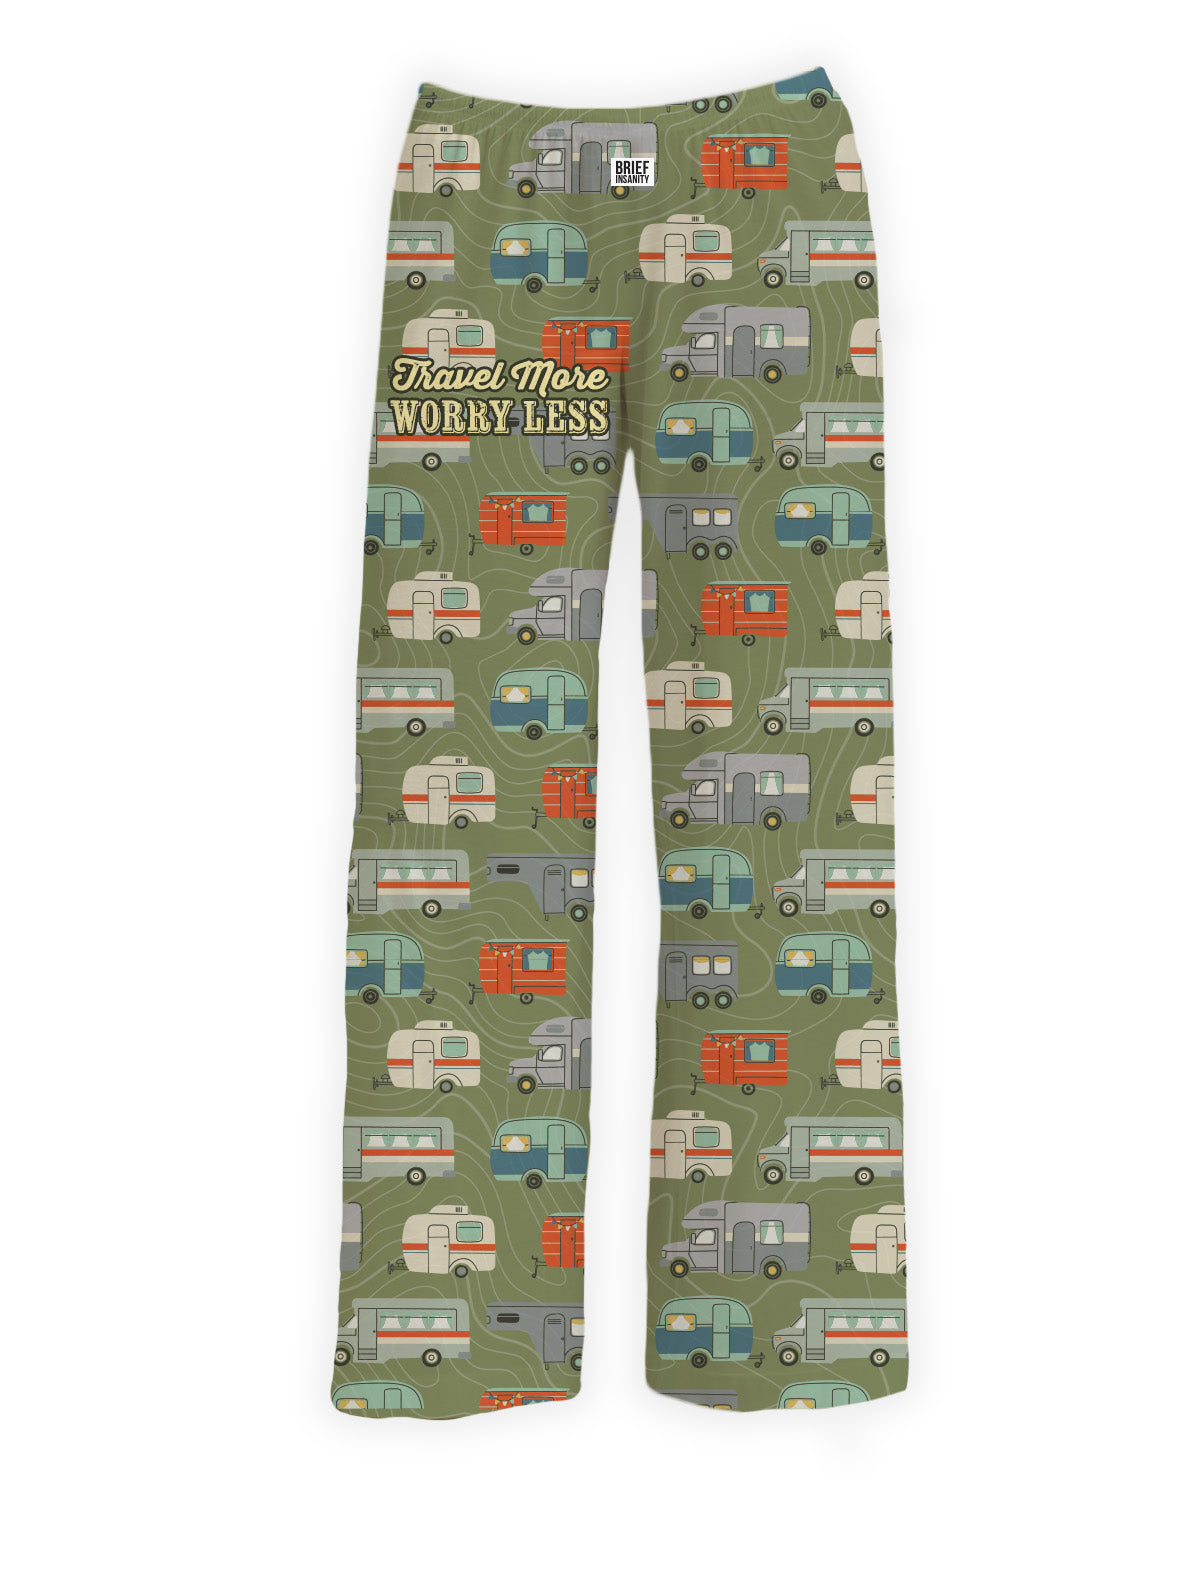 BRIEF INSANITY's Travel More Worry Less Pajama Lounge Pants